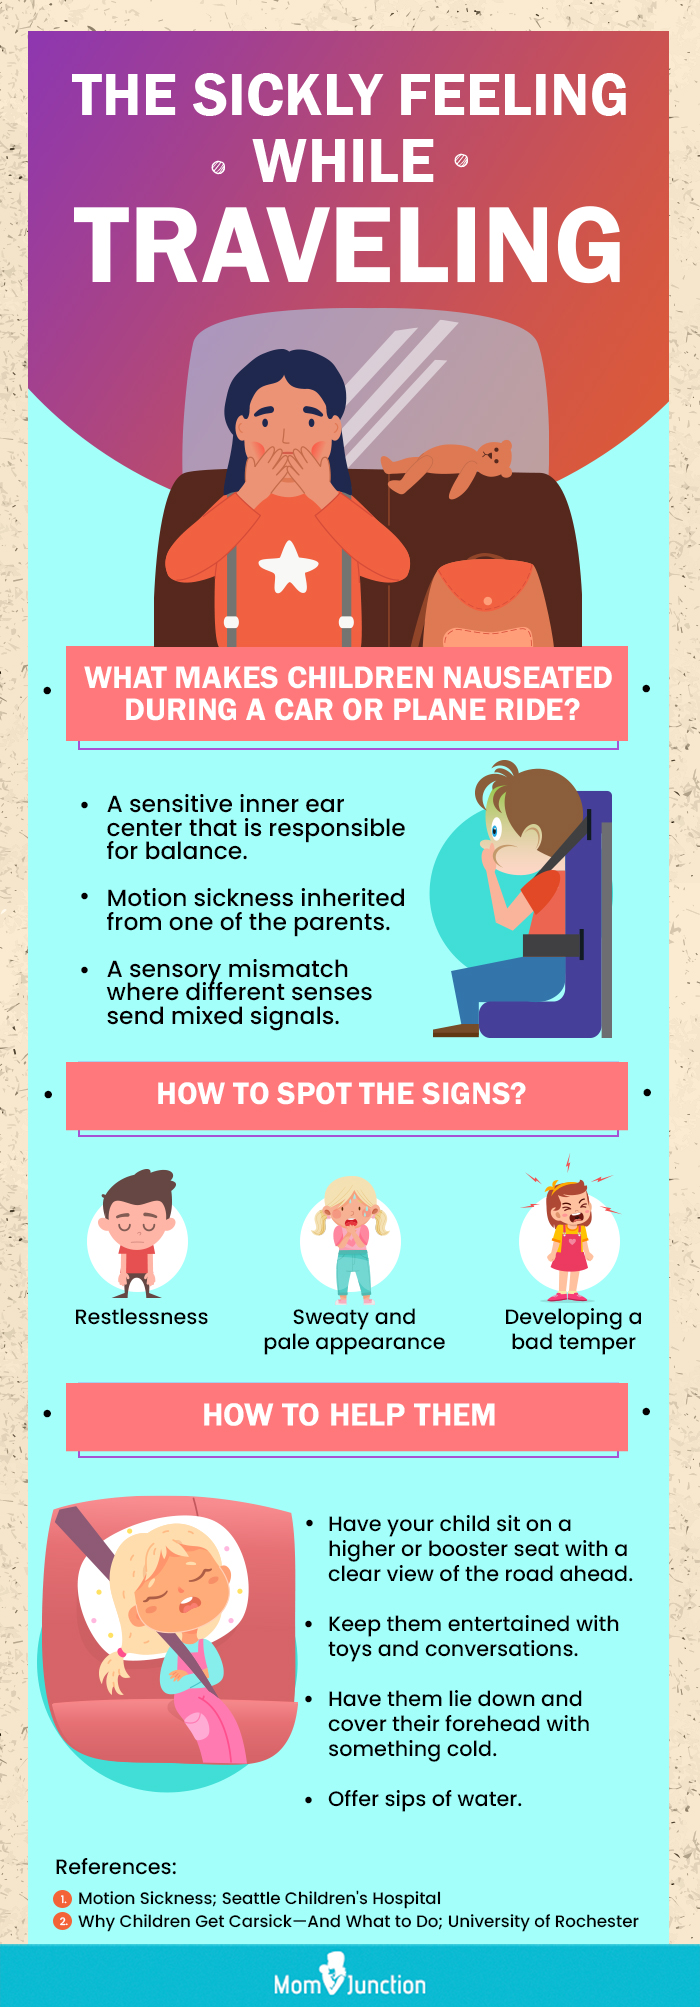 17 Causes Of Nausea In Children, Treatment And Home Remedies | MomJunction